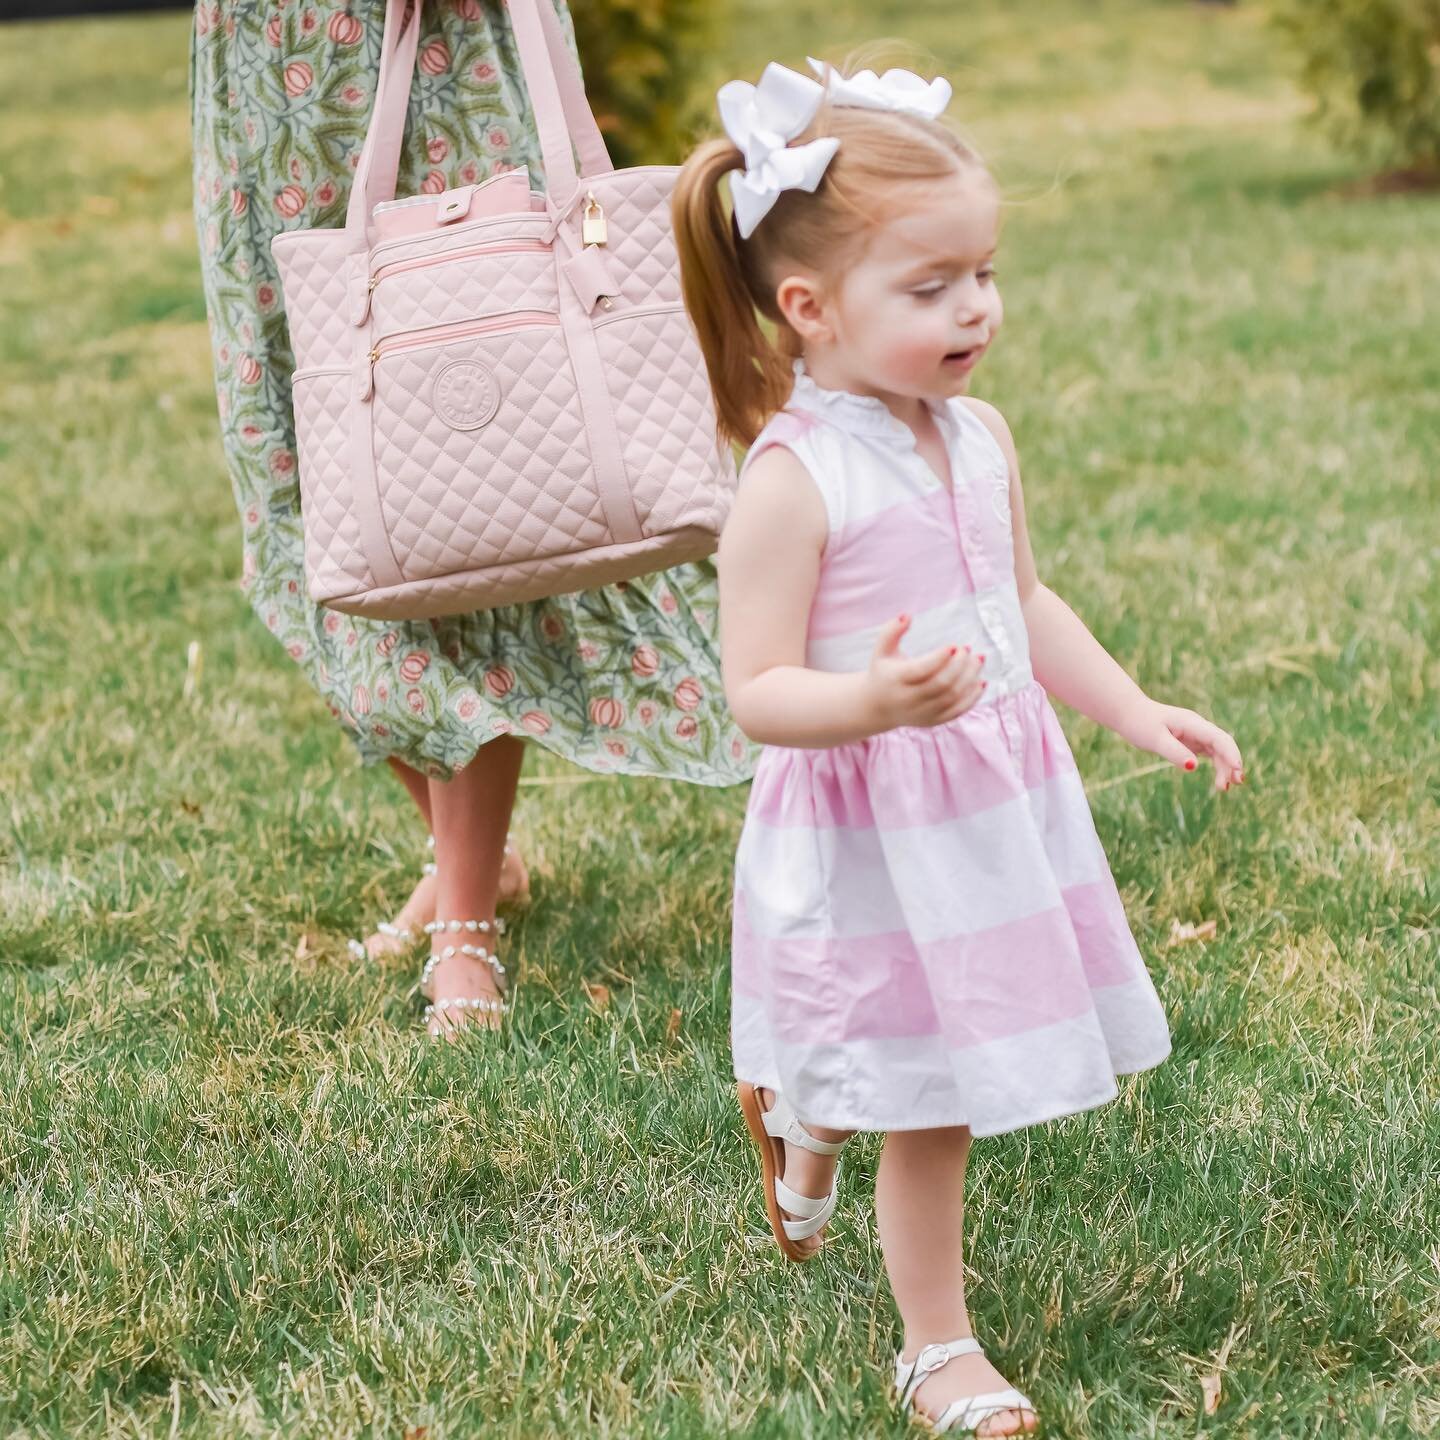 Mama&rsquo;s Easter (bag) has never looked so good 💐🐣

Feel effortlessly organized while keeping up with littles with the DD Bird Mama Bird Bundle.